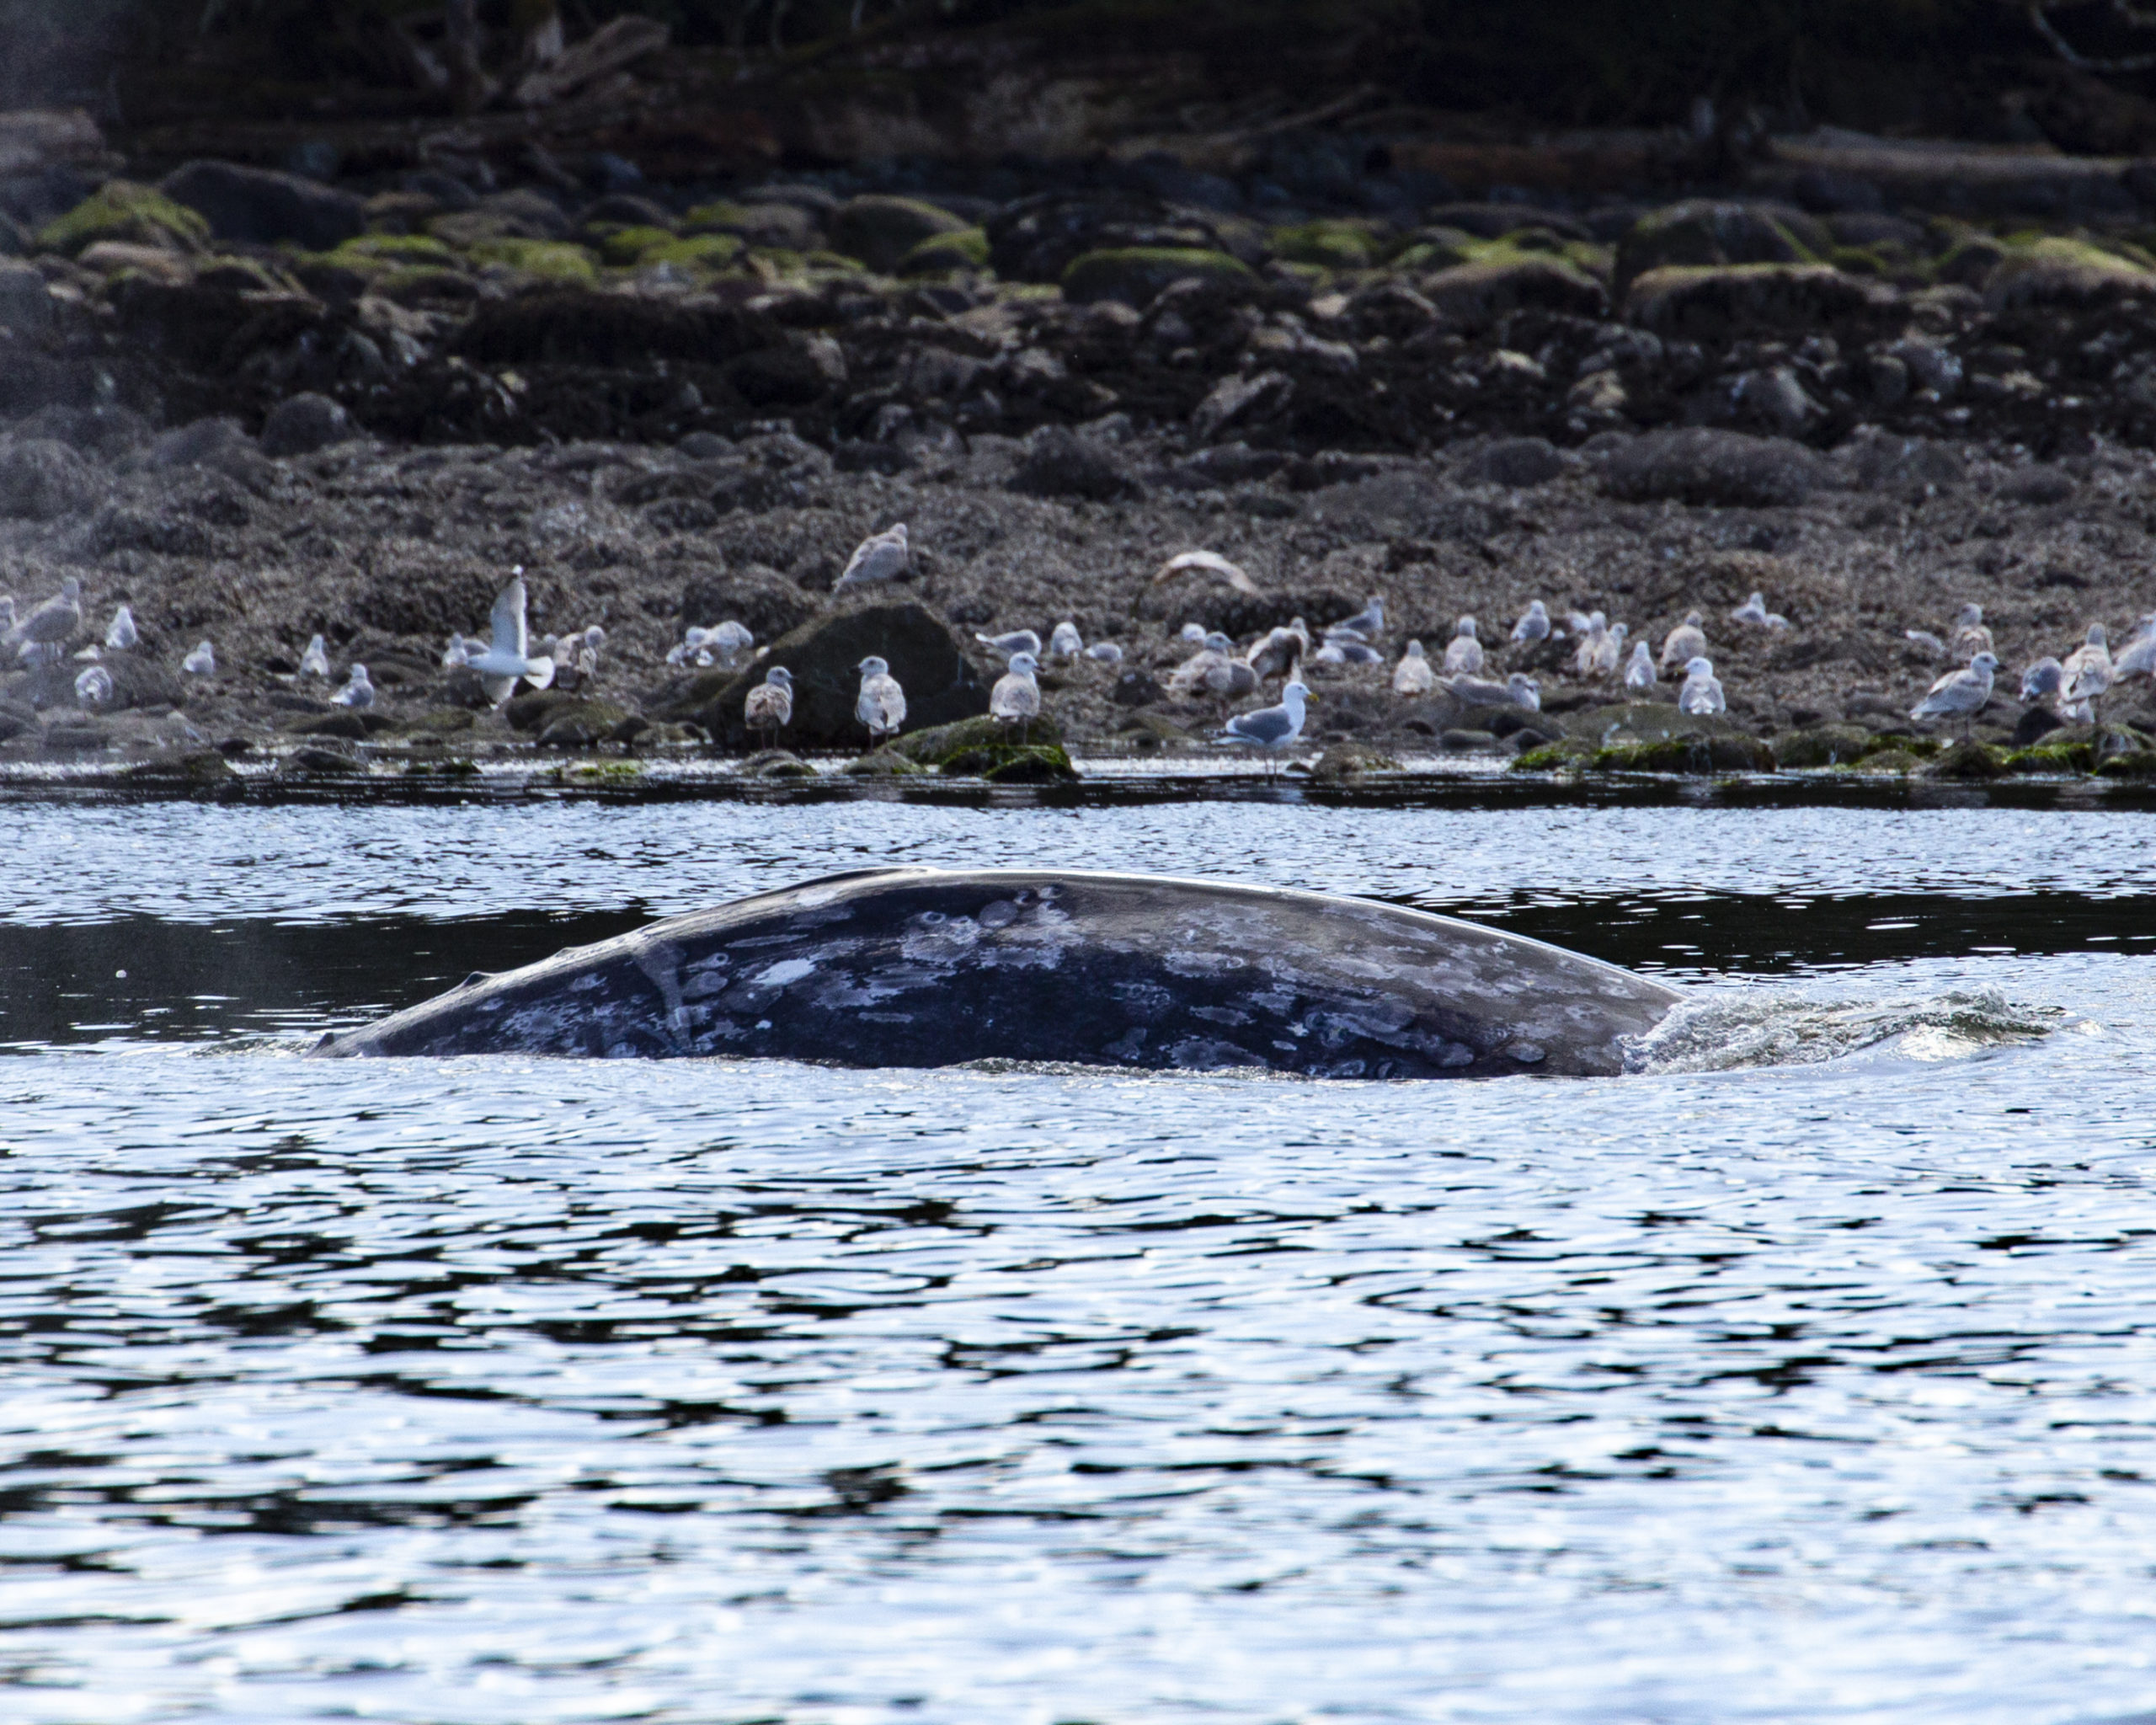 Grey Whale surfacing near Ucluelet surrounded by gulls